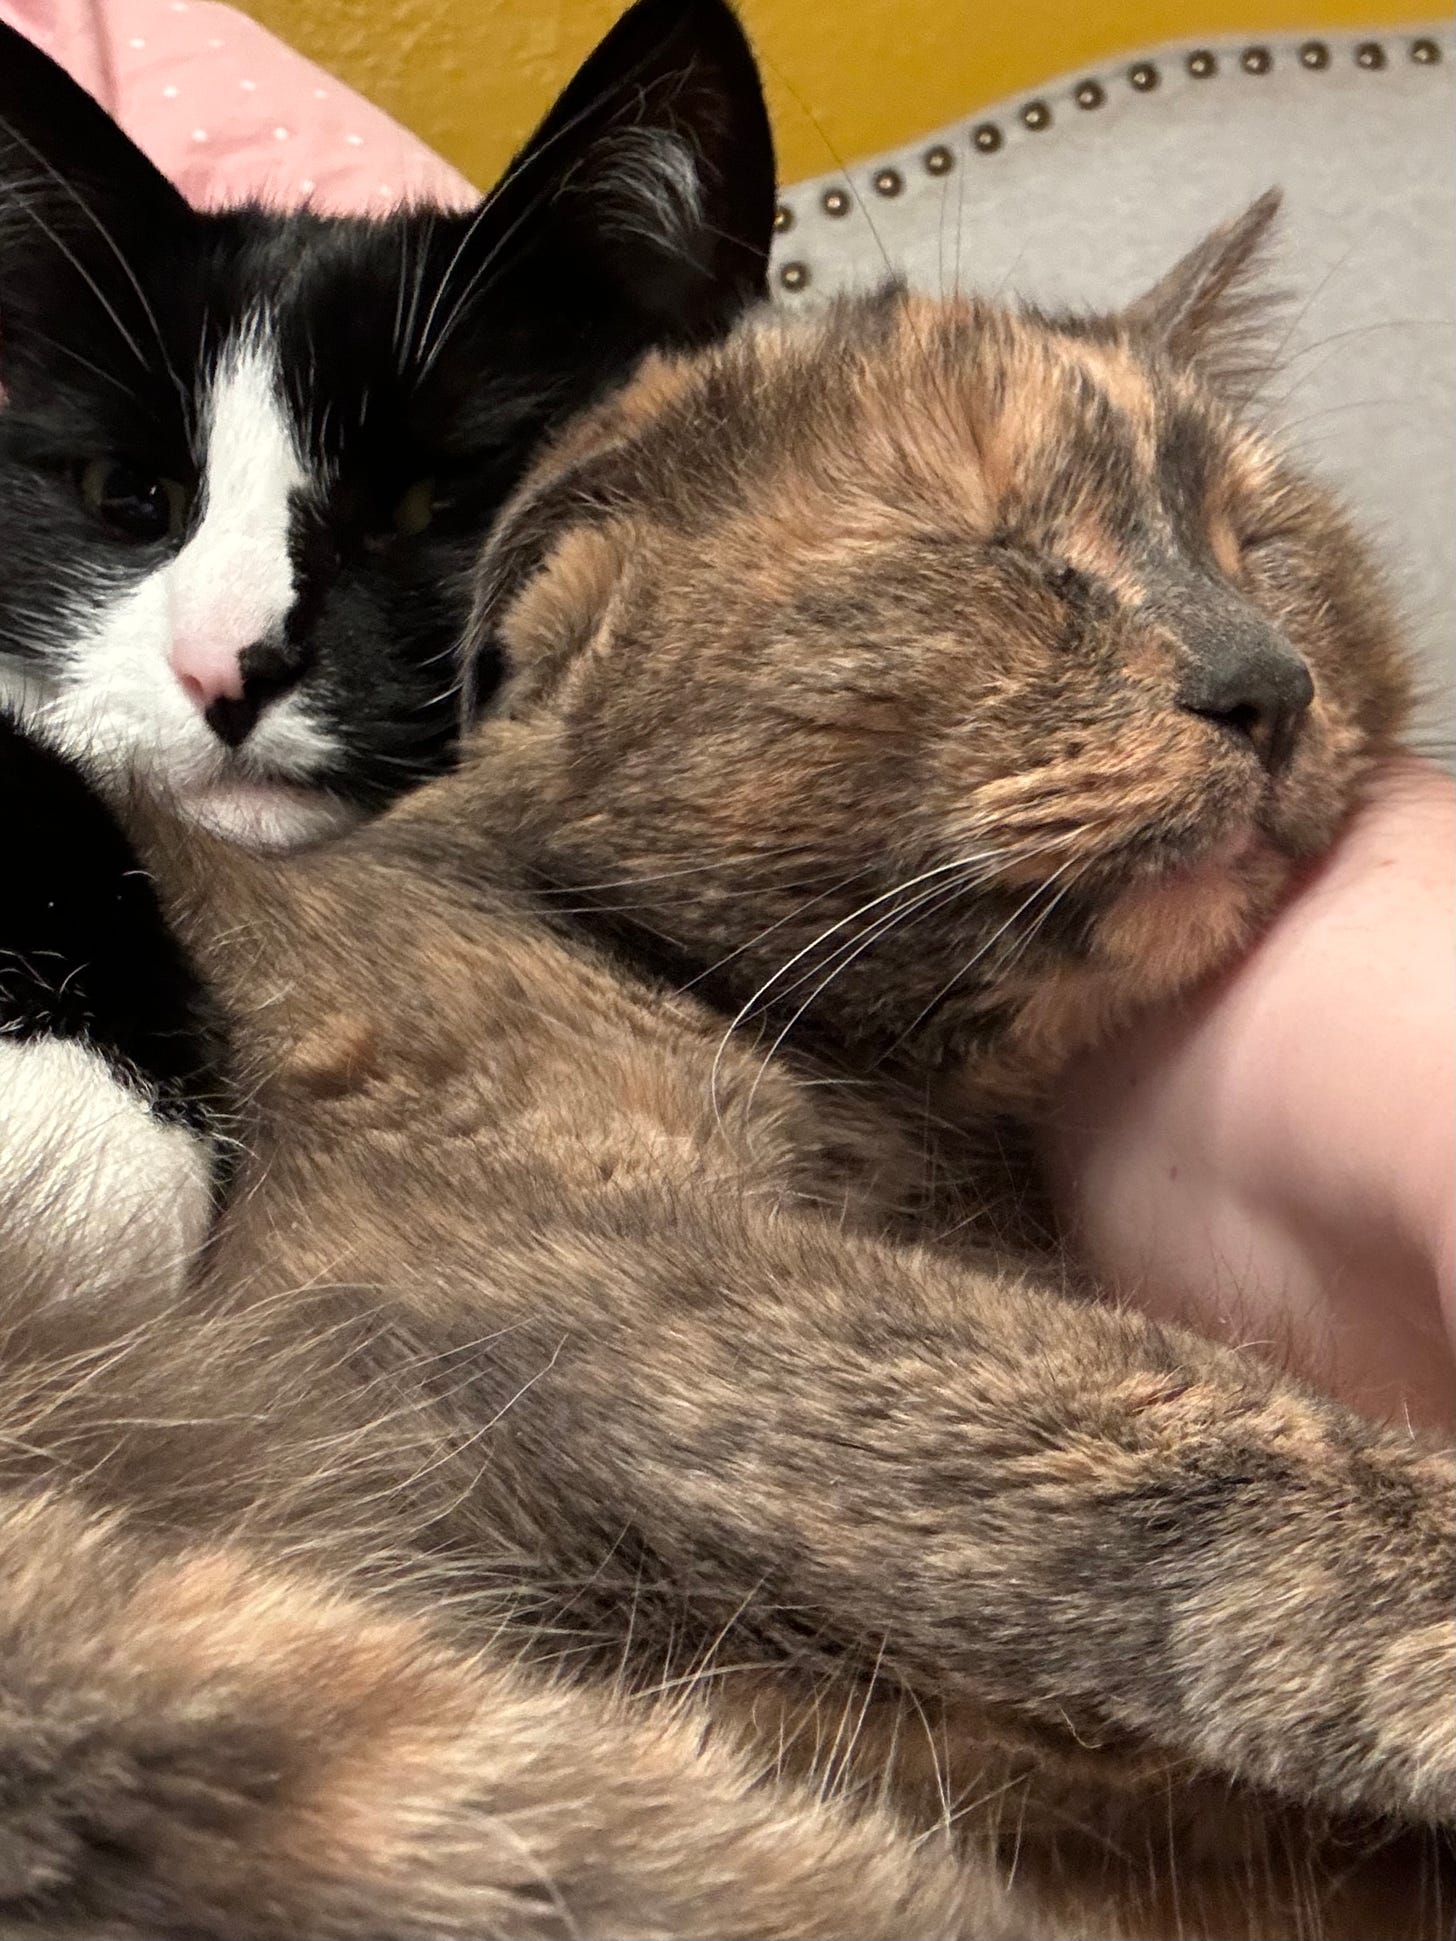 A dilute tortoiseshell cat finds herself sandwiched between her human’s arm and her tuxedo cat brother, who has a paw wrapped possessively around her. The tortie’s eyes are closed; the tuxie is looking directly at the camera, because he wants this cuteness to be immortalized.